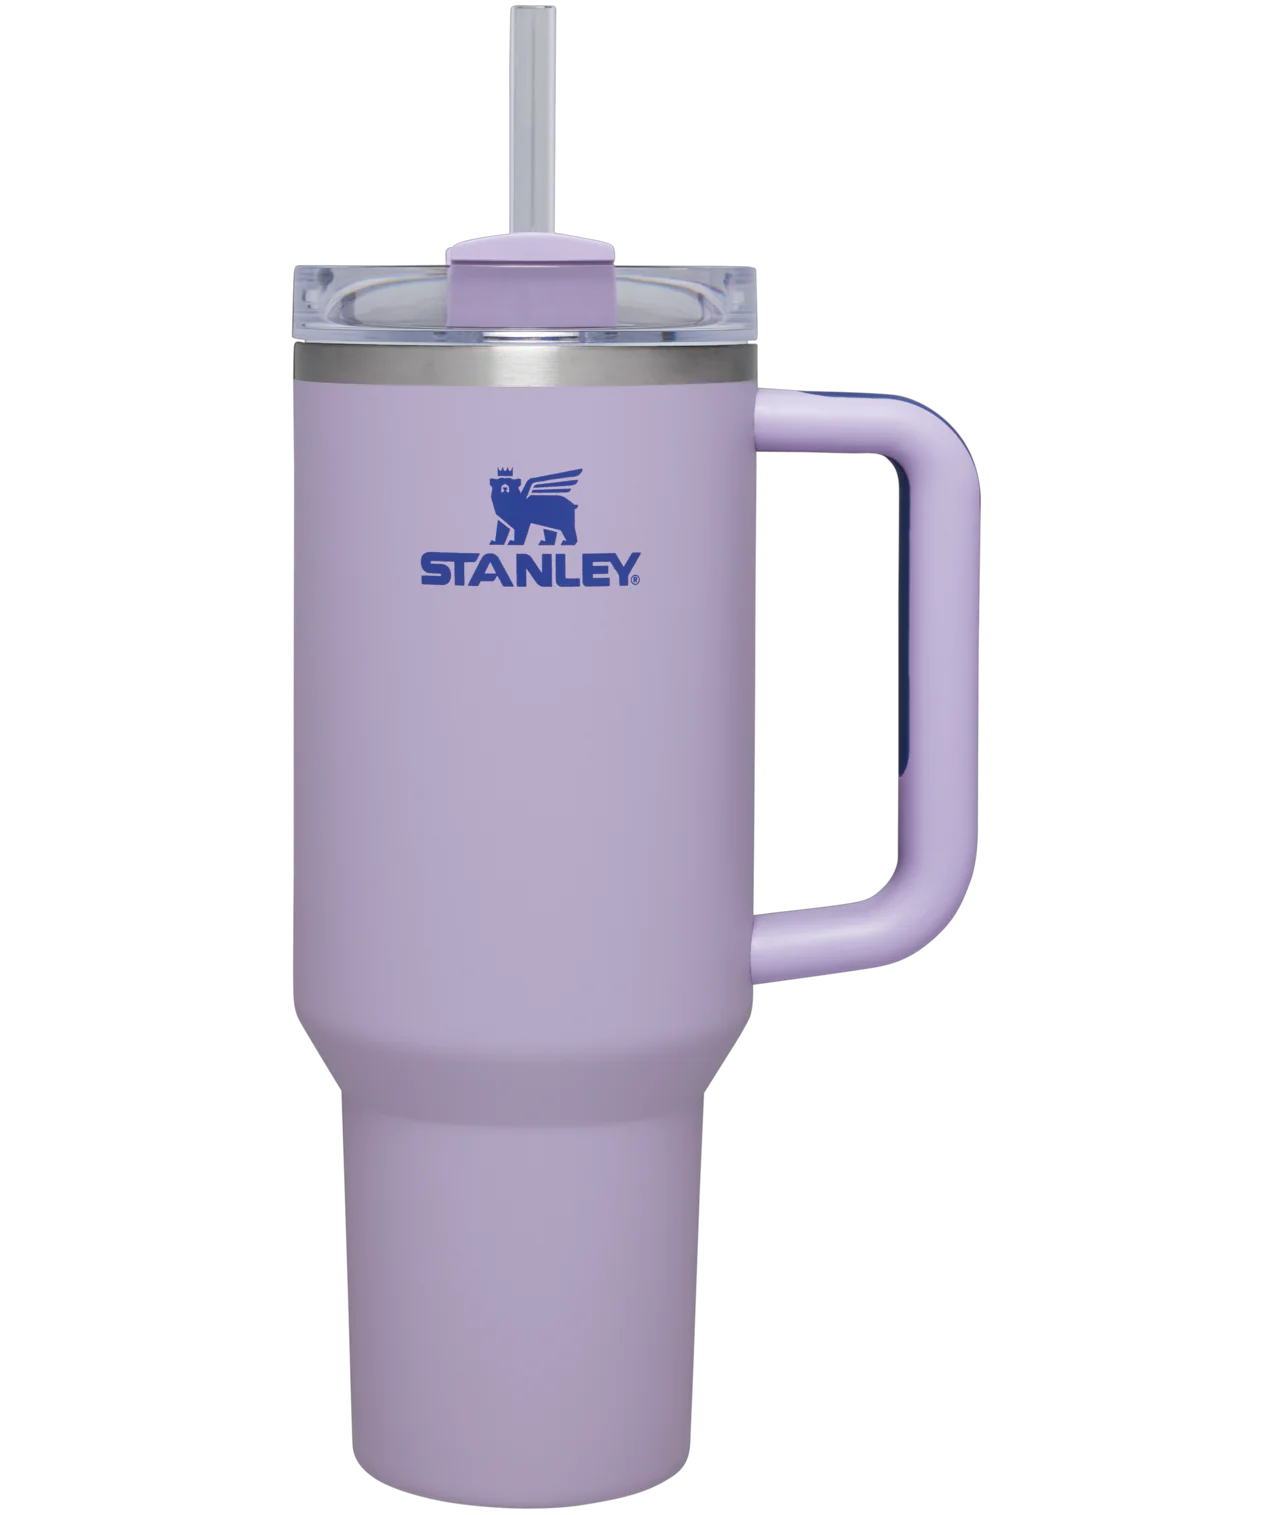 Simple Modern vs Stanley: What's The Better Water Bottle?